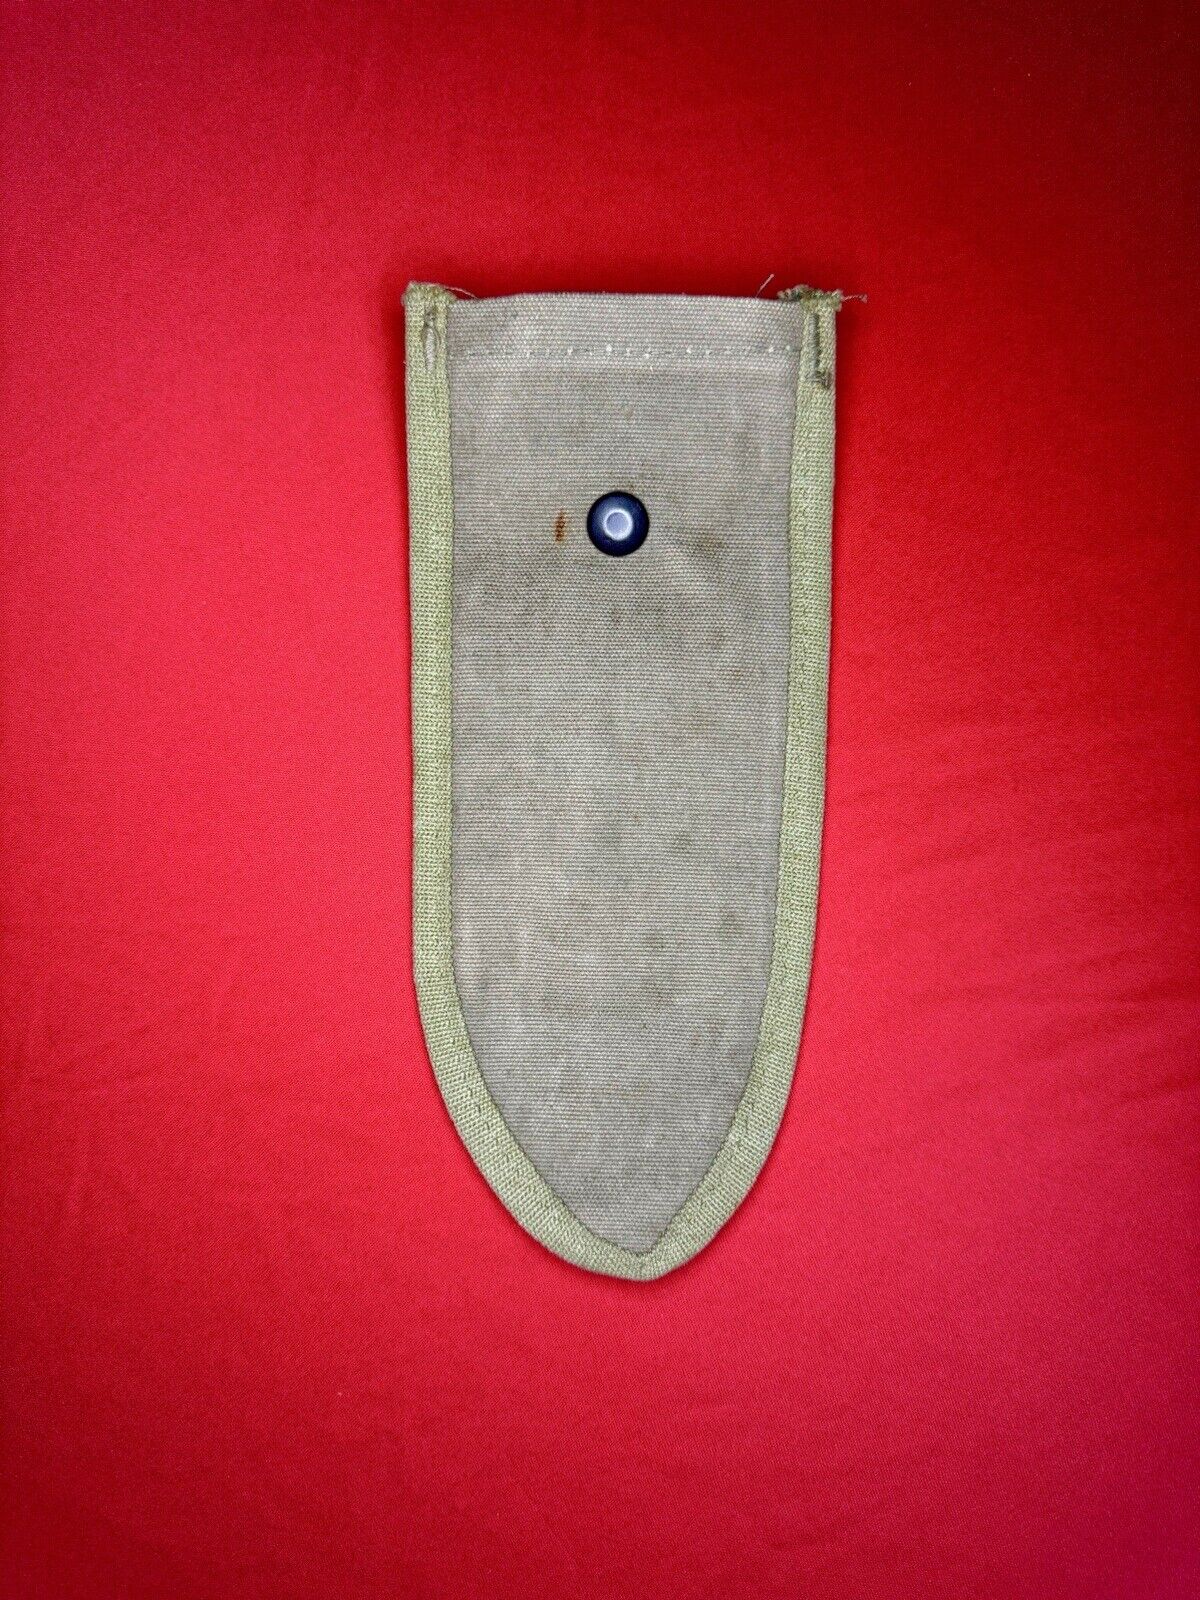 WW2 USMC WIRE CUTTER COVER POUCH